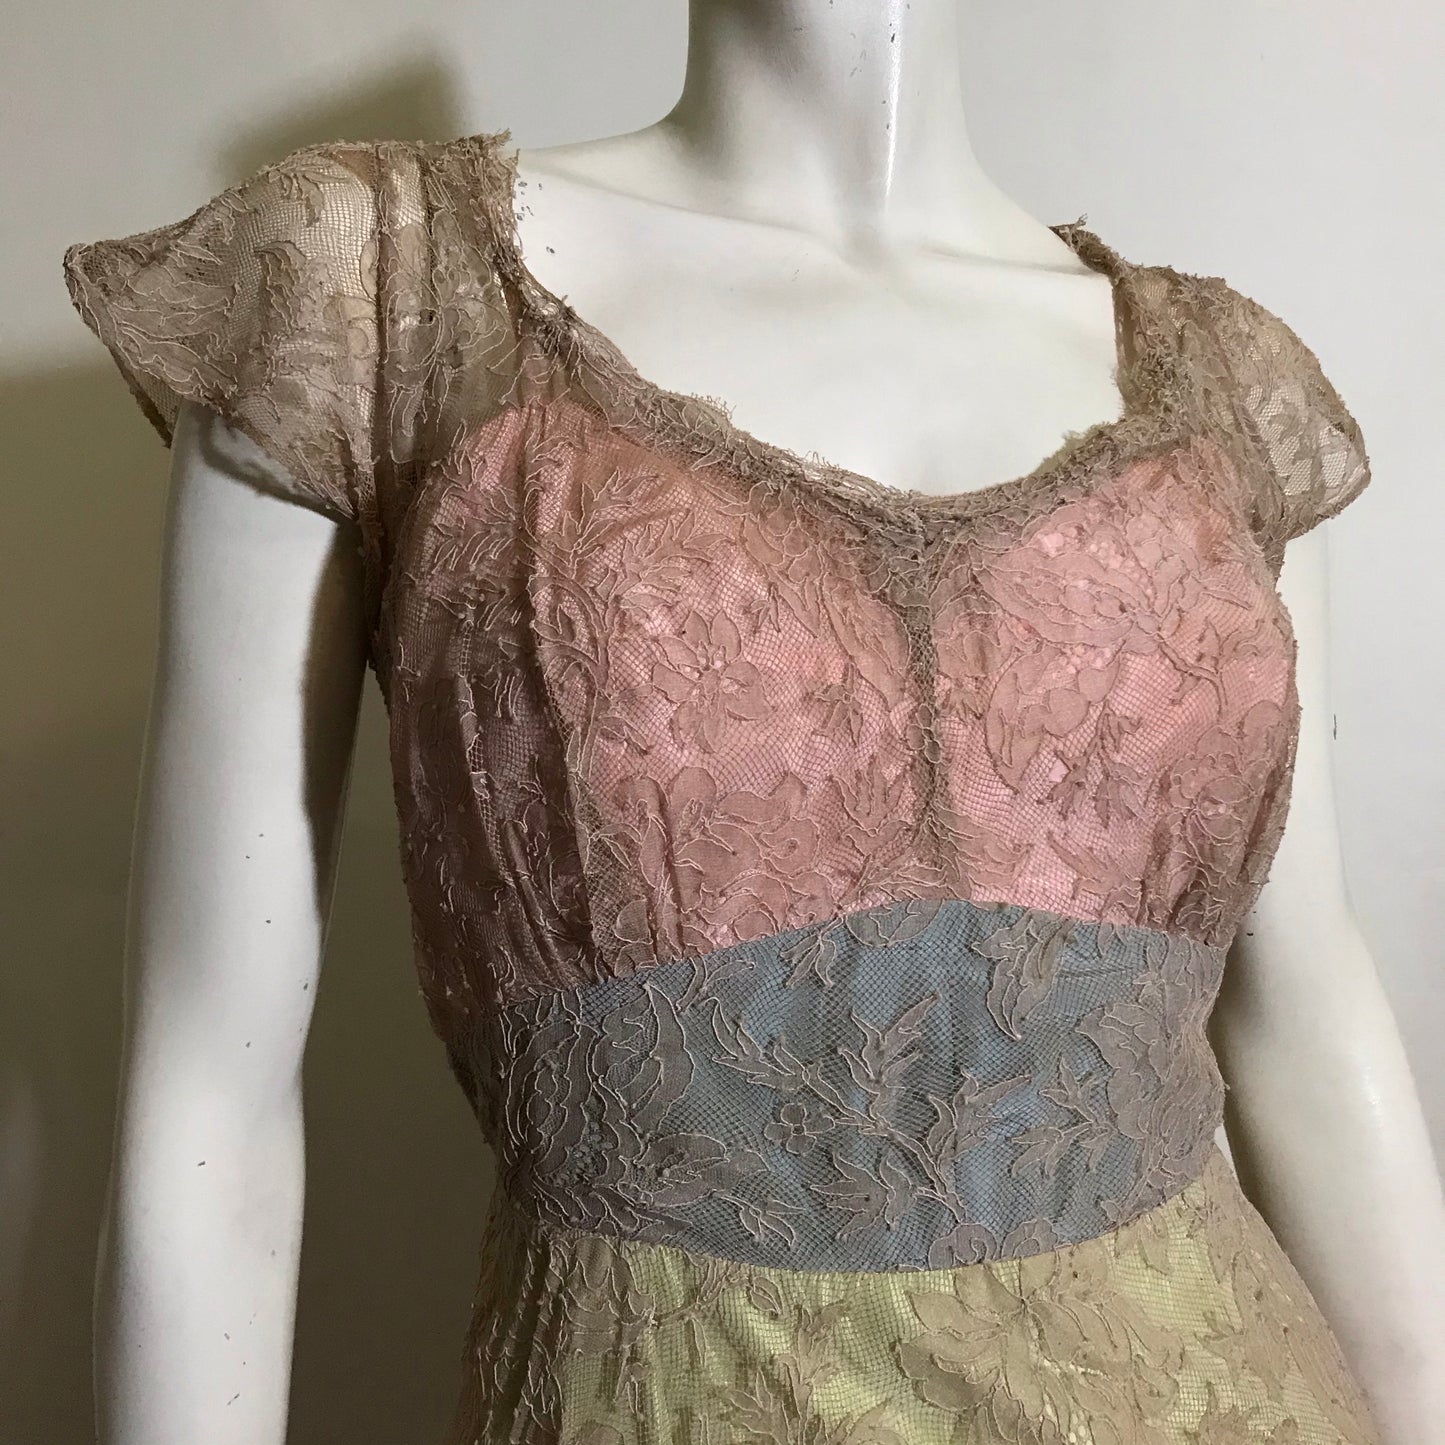 Shades of Sherbet Taffeta Evening Gown with Lace Overlay circa 1940s